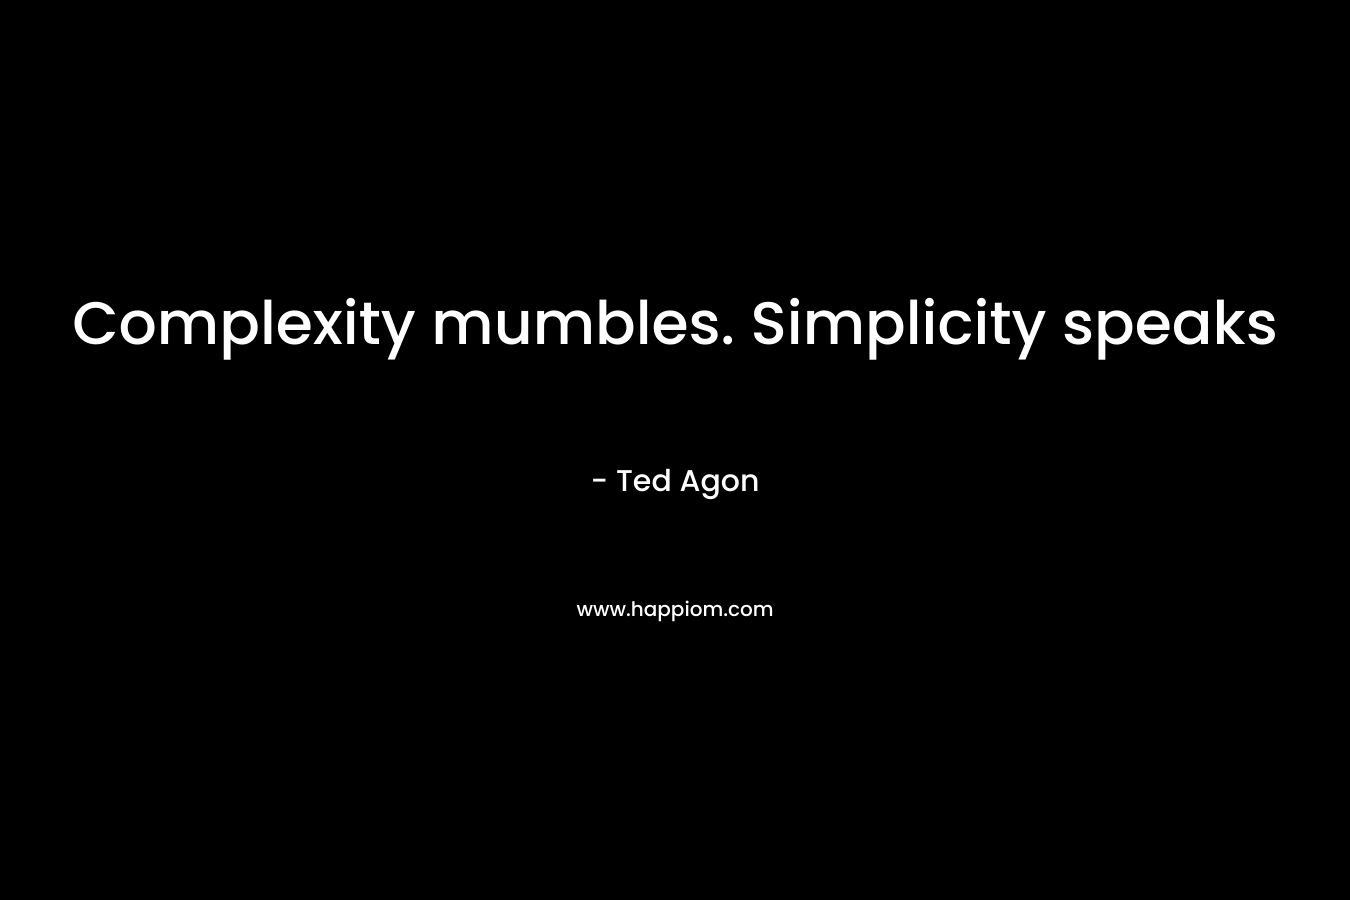 Complexity mumbles. Simplicity speaks